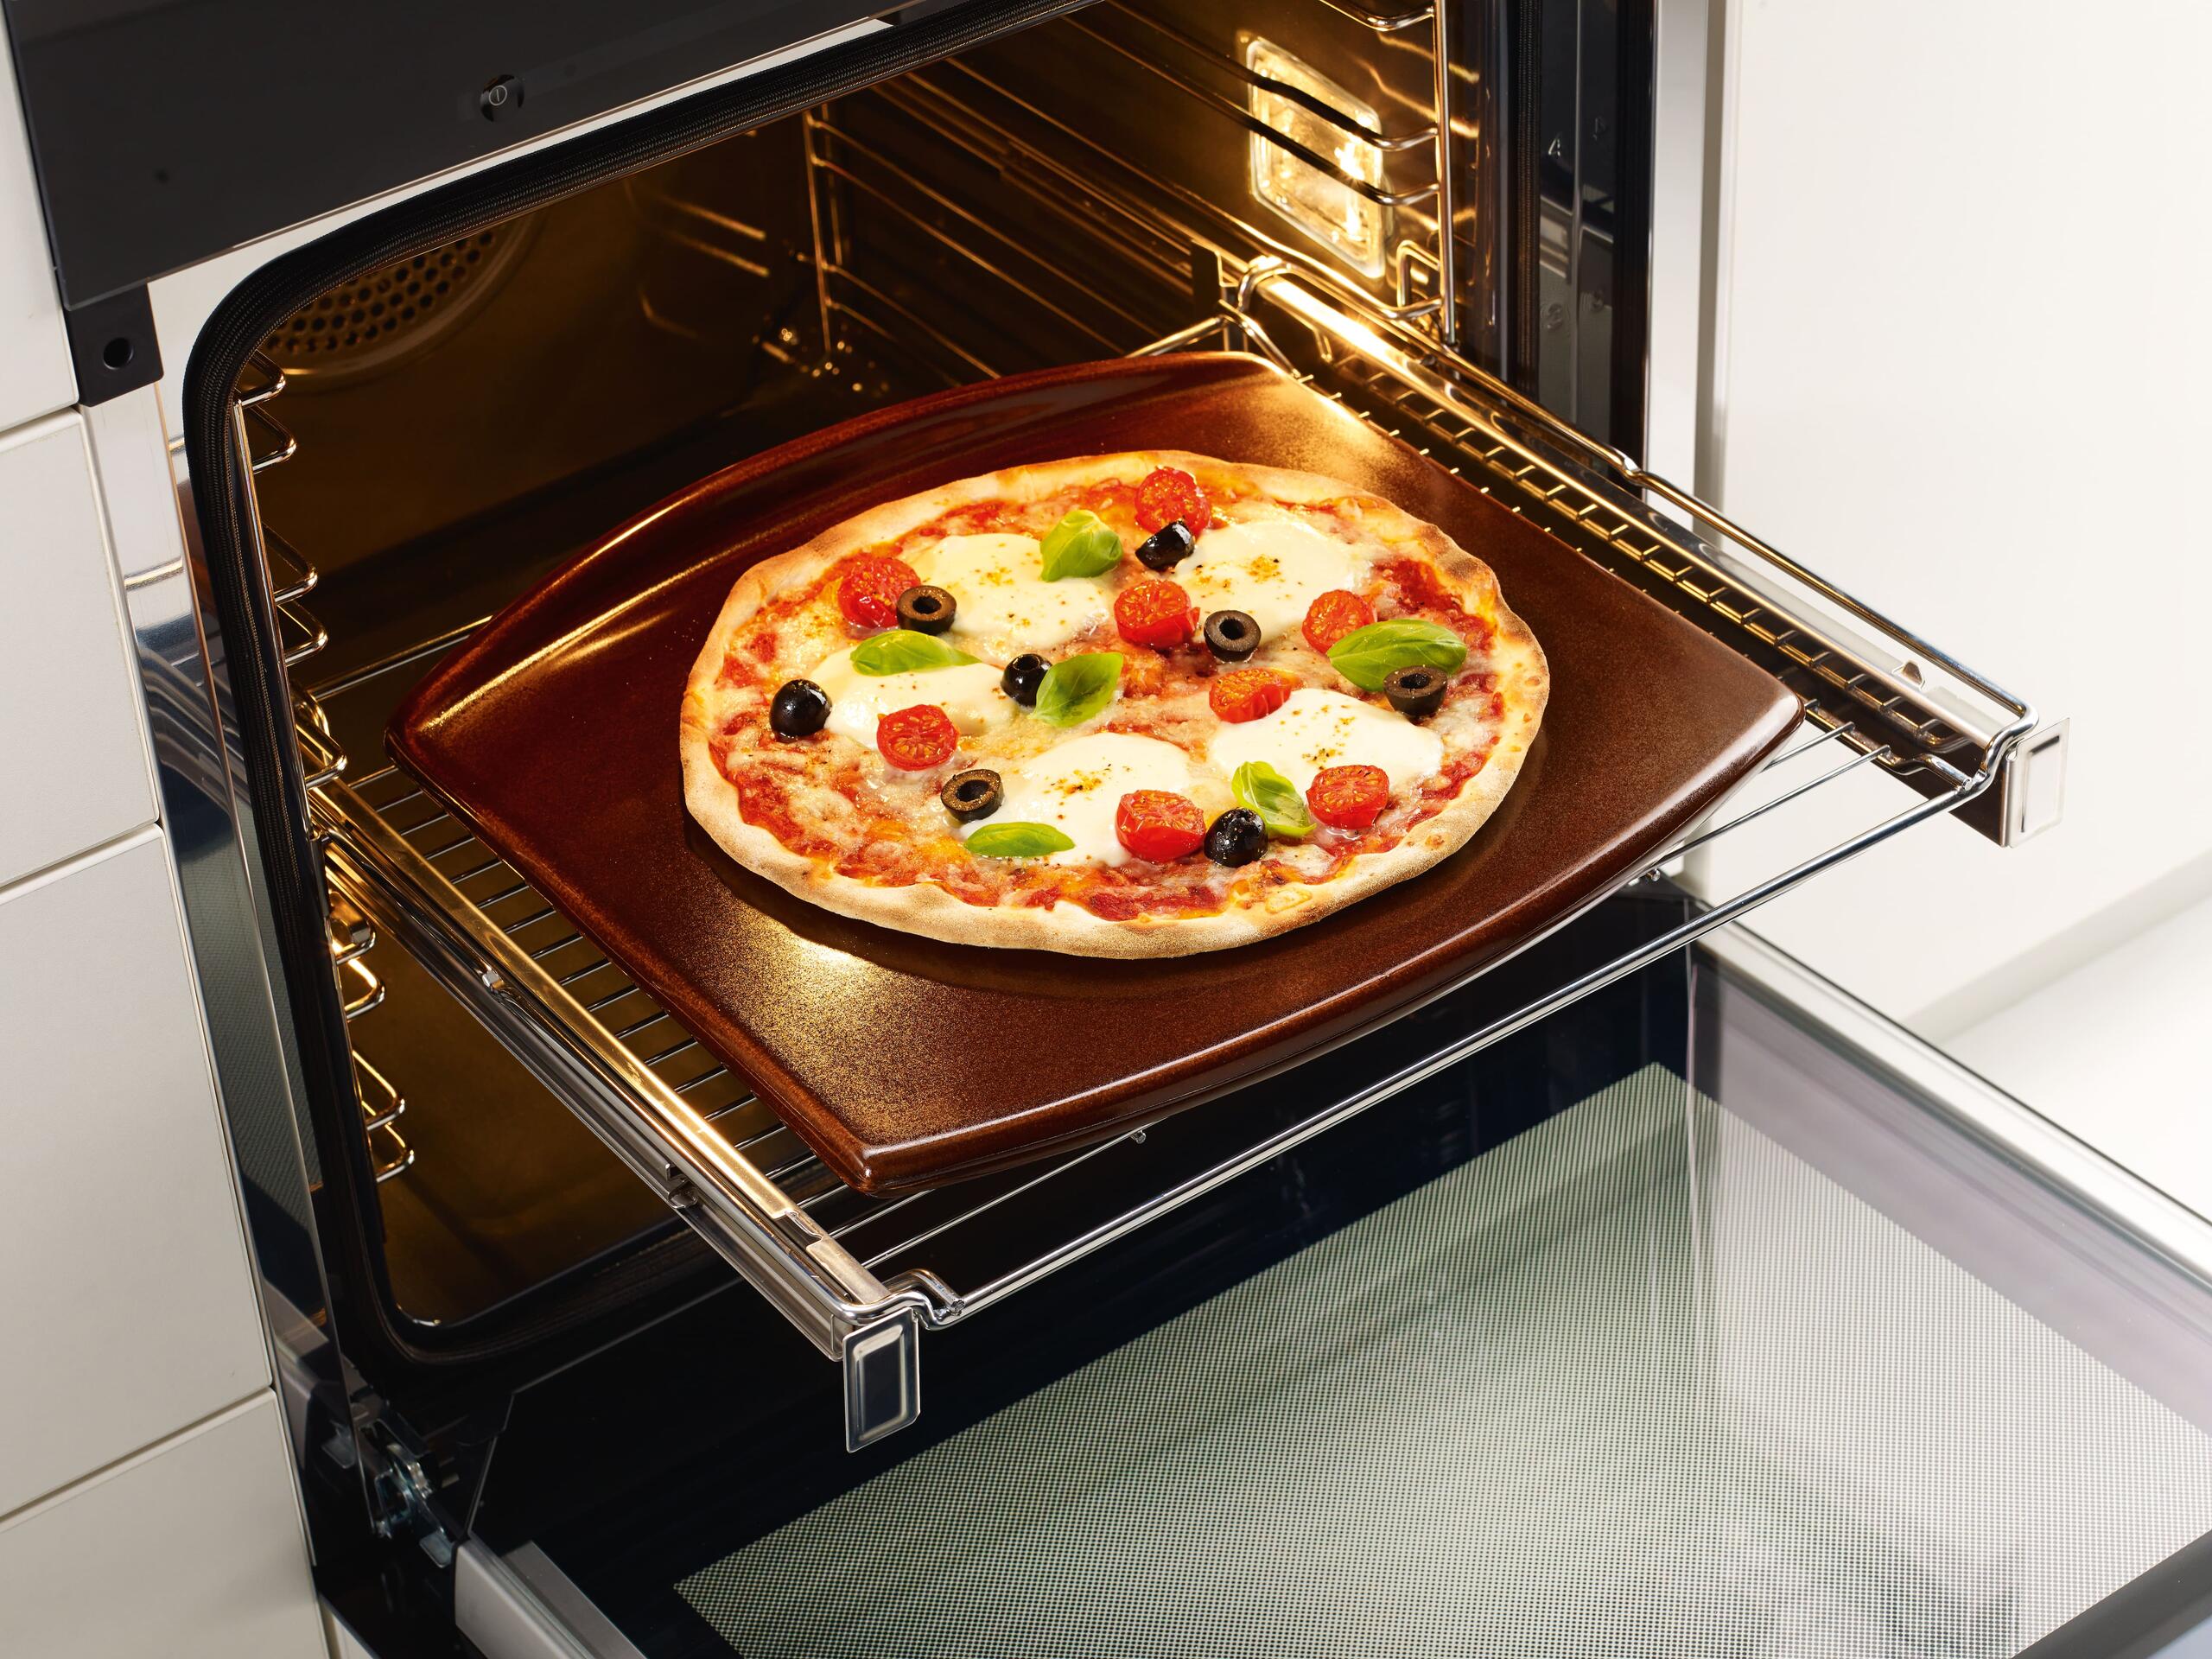 Miele HBS60 Hbs 60 - Gourmet Baking Stone For Achieving The Same Results As If Baked In A Stone Oven.